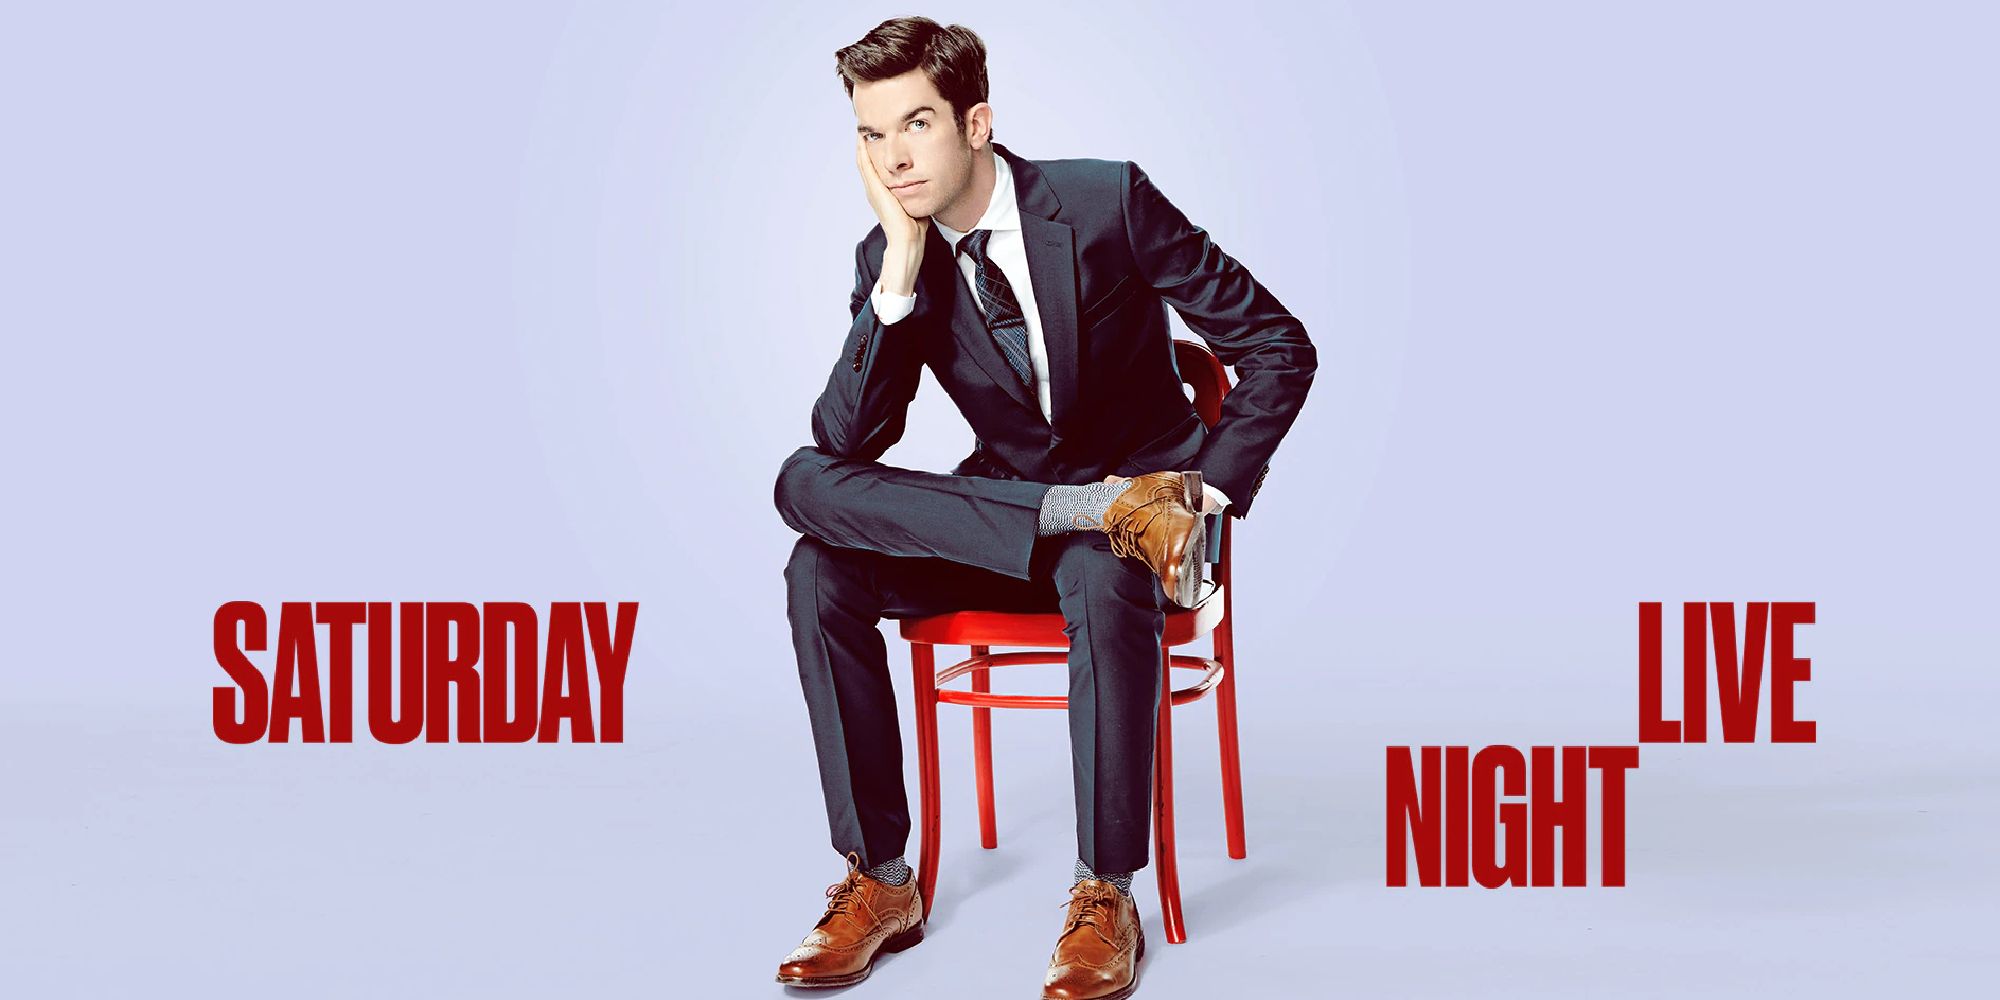 John Mulaney in a photoshoot for SNL in 2018